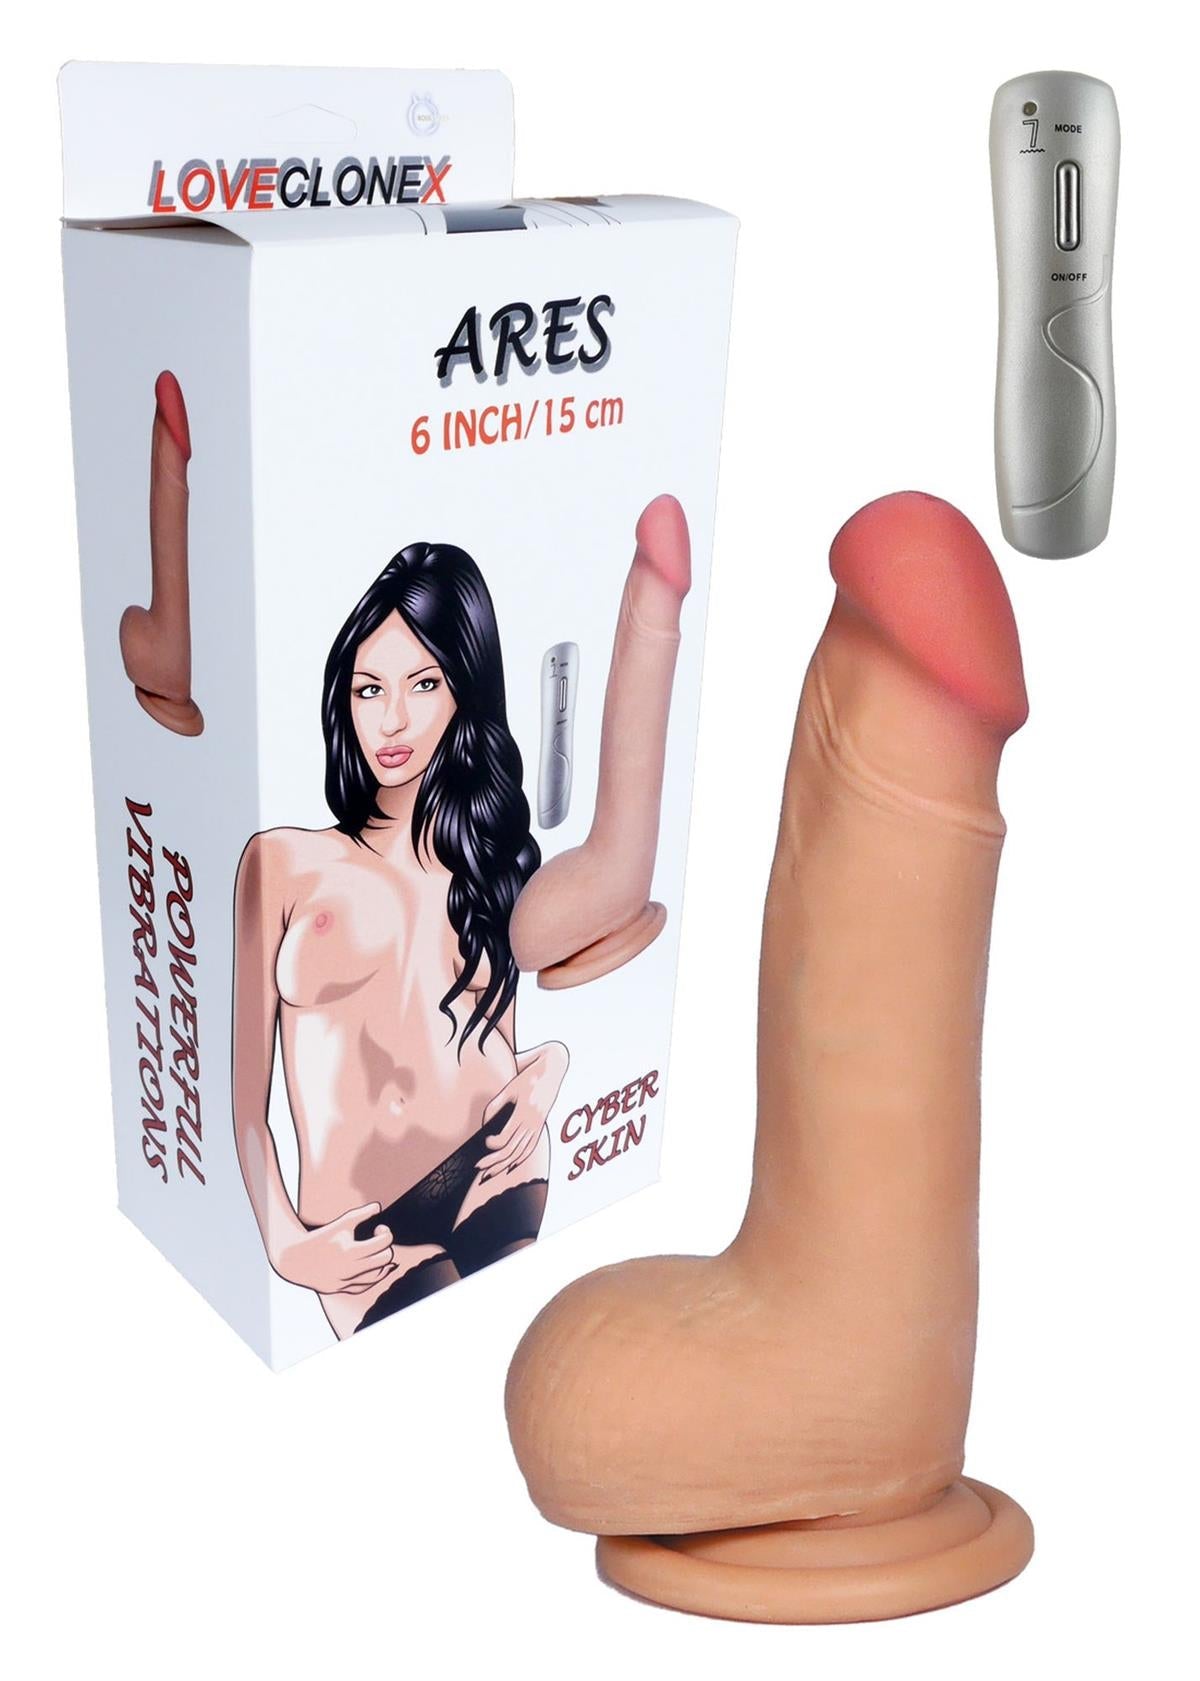 Bossoftoys Ares Loveclonex Ultra Realistic Vibrator - Cyber skin feels like real - Better then Silicone - 3 cm thick - 21-00001 - Suction Cup - Wired Remote - Flesh - 6 inch / 15 cm